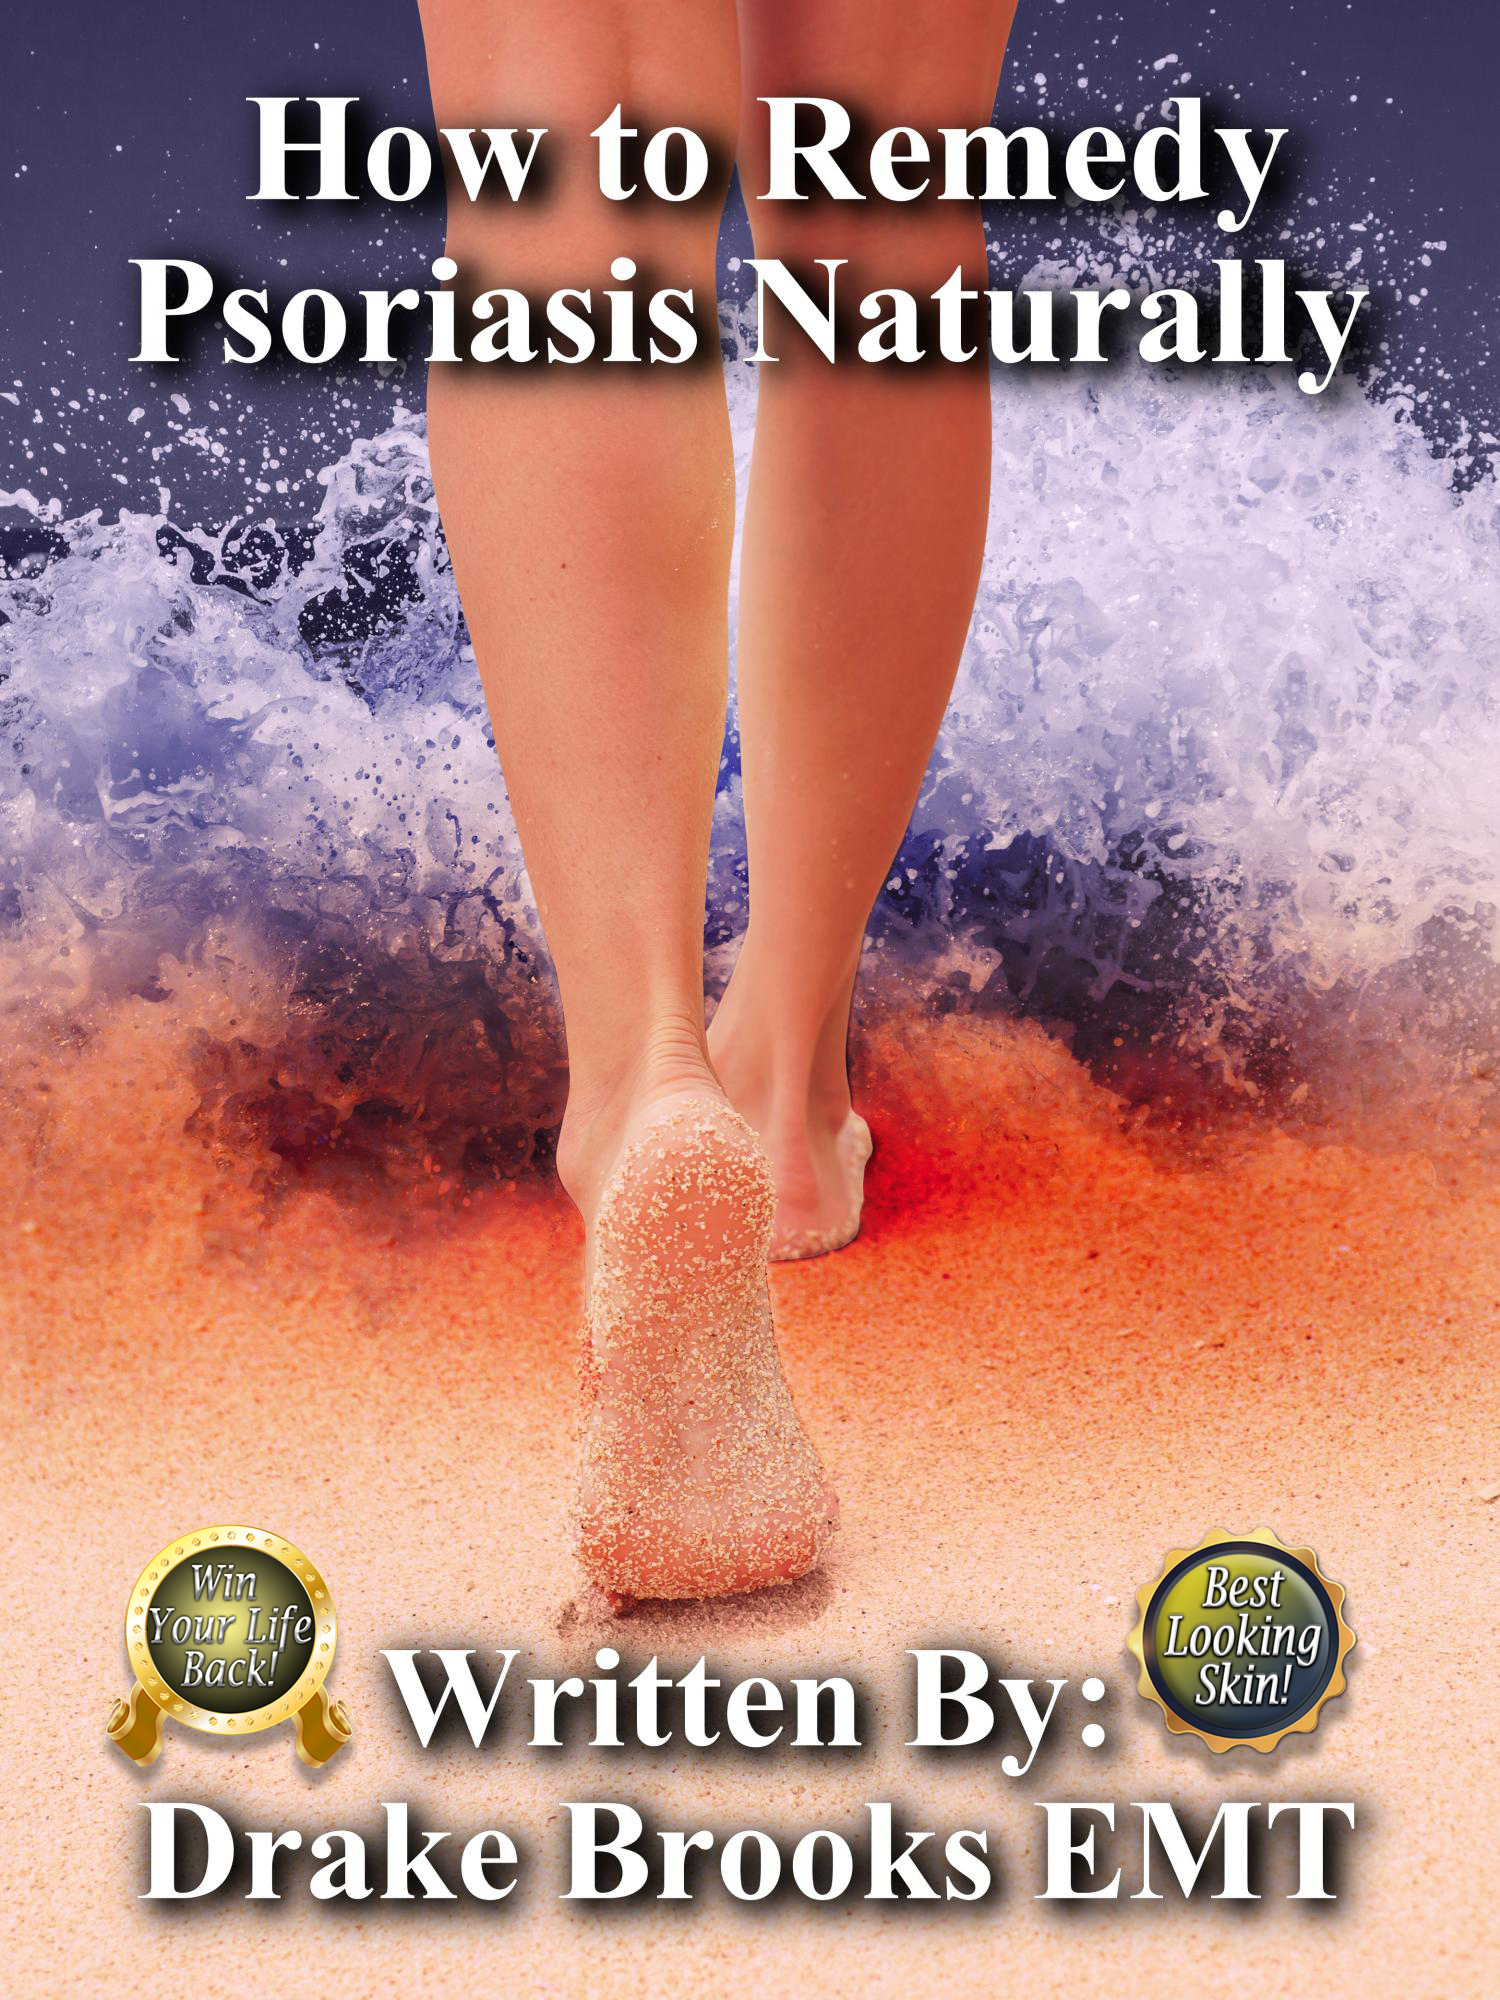 How-to-rememdy-psoriasis-naturally-cover